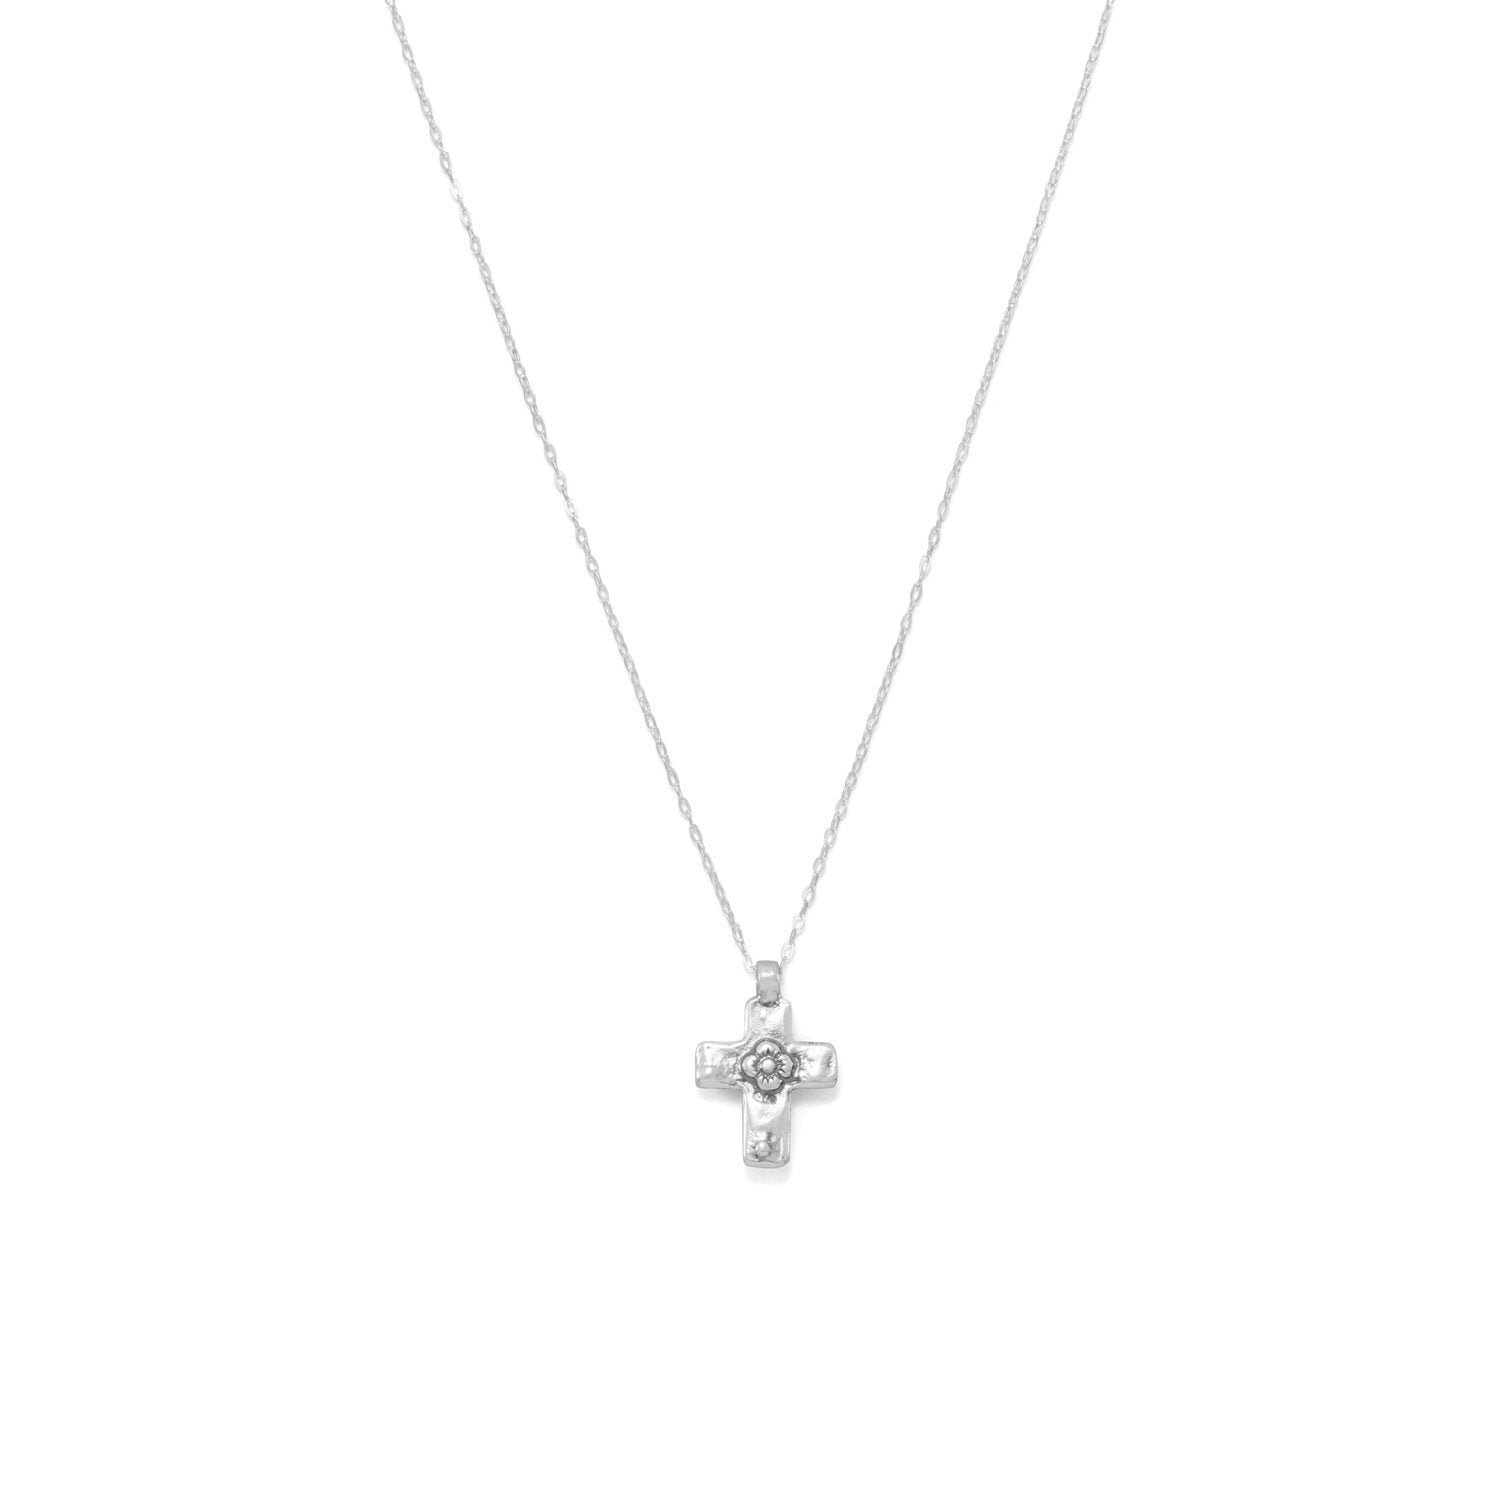 Reversible Cross Charm with Cultured Freshwater Pearl Necklace - Joyeria Lady